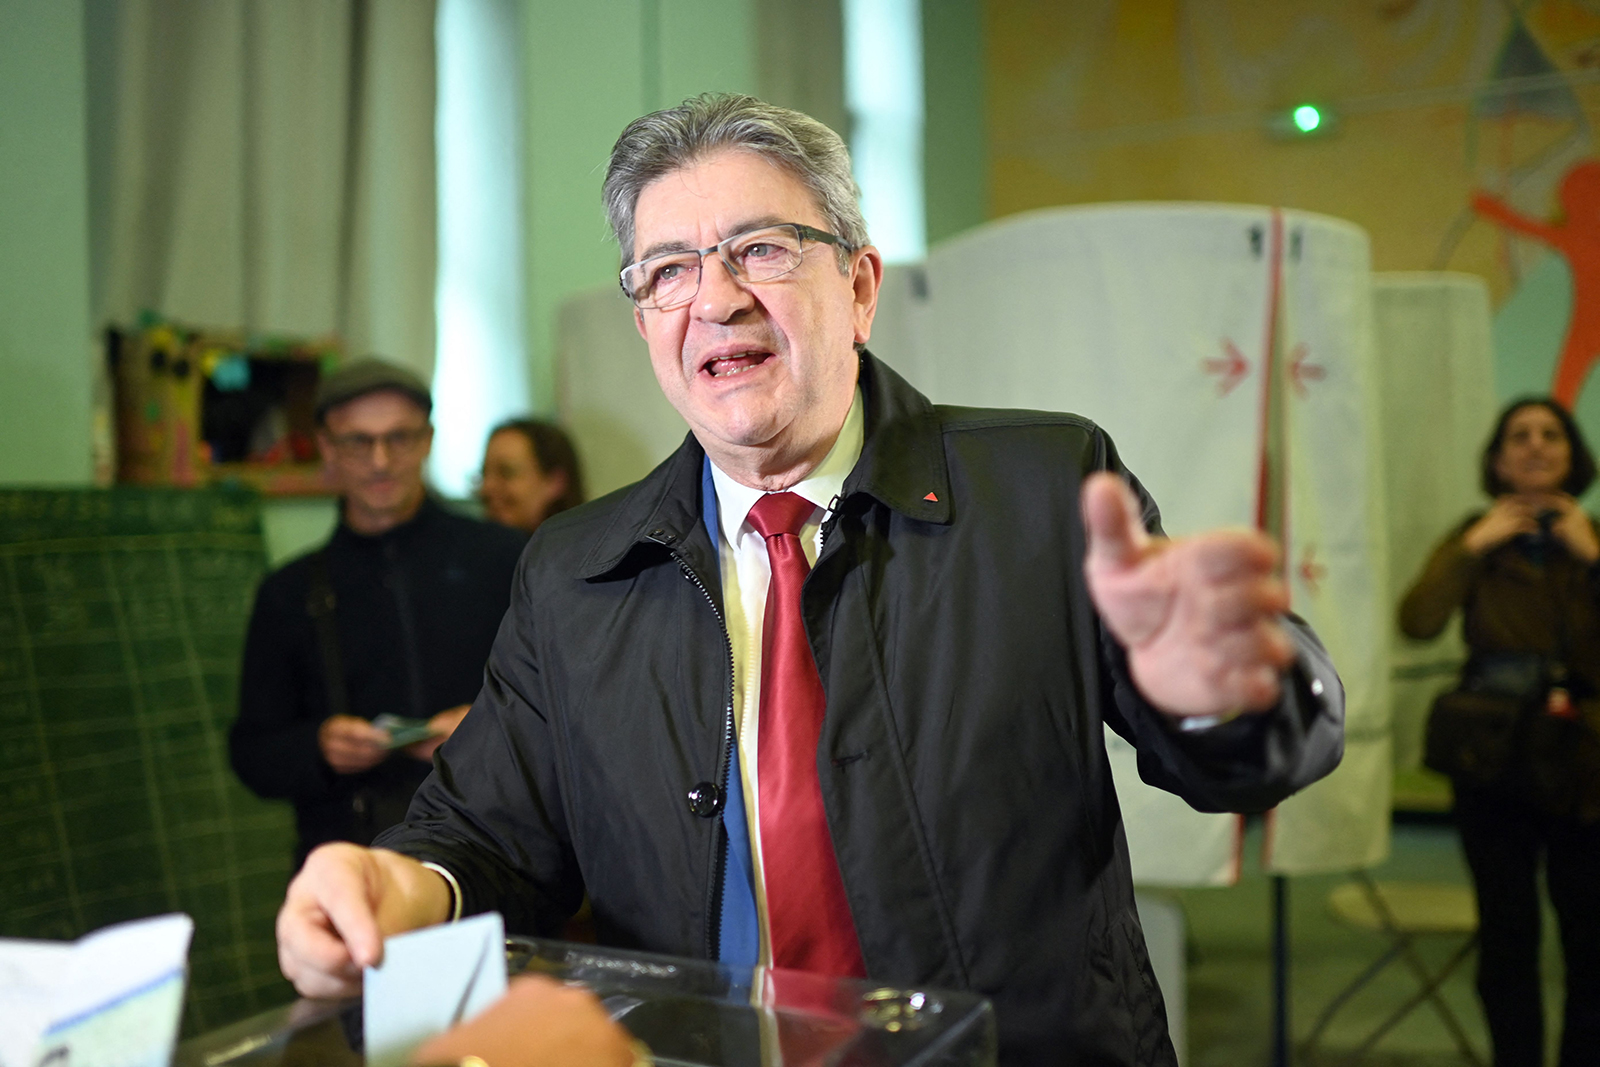 France's leftist movement La France Insoumise party leader and former candidate for the 2022 presidential election Jean-Luc Melenchon casts his vote during the second round of France's presidential election at a polling station in Marseille, southern France, on April 24.